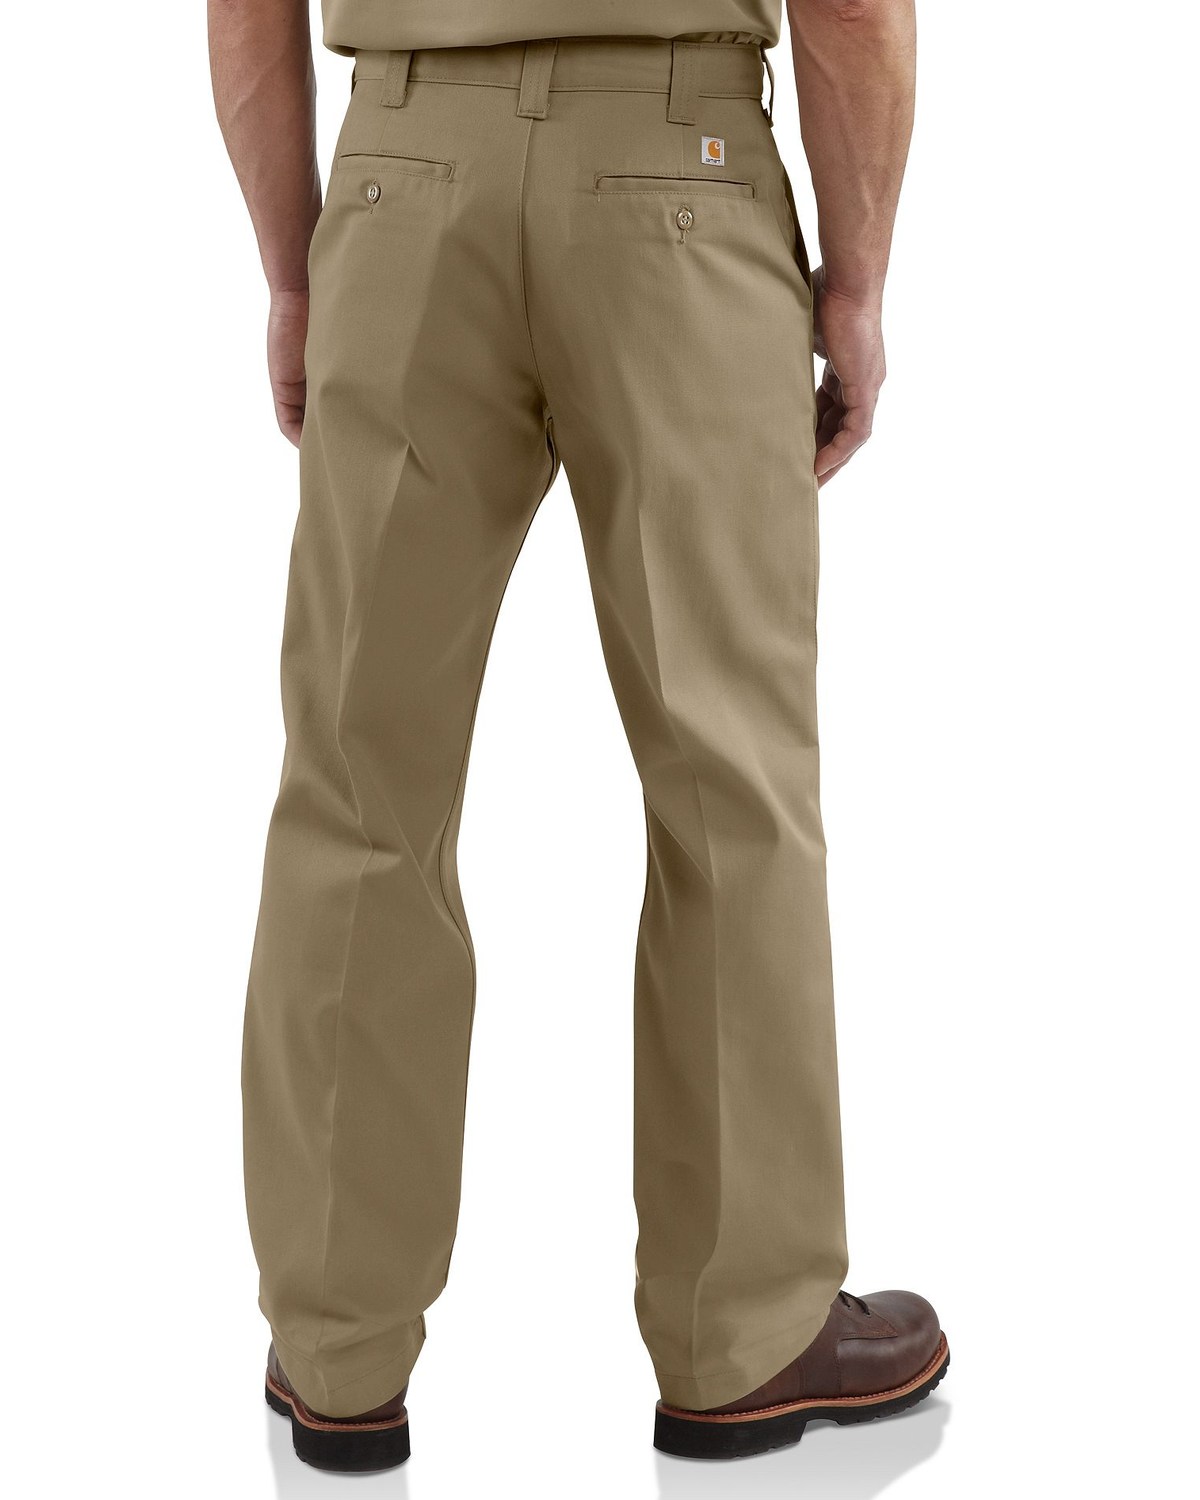 Carhartt Blended Twill Chino Work Pants 